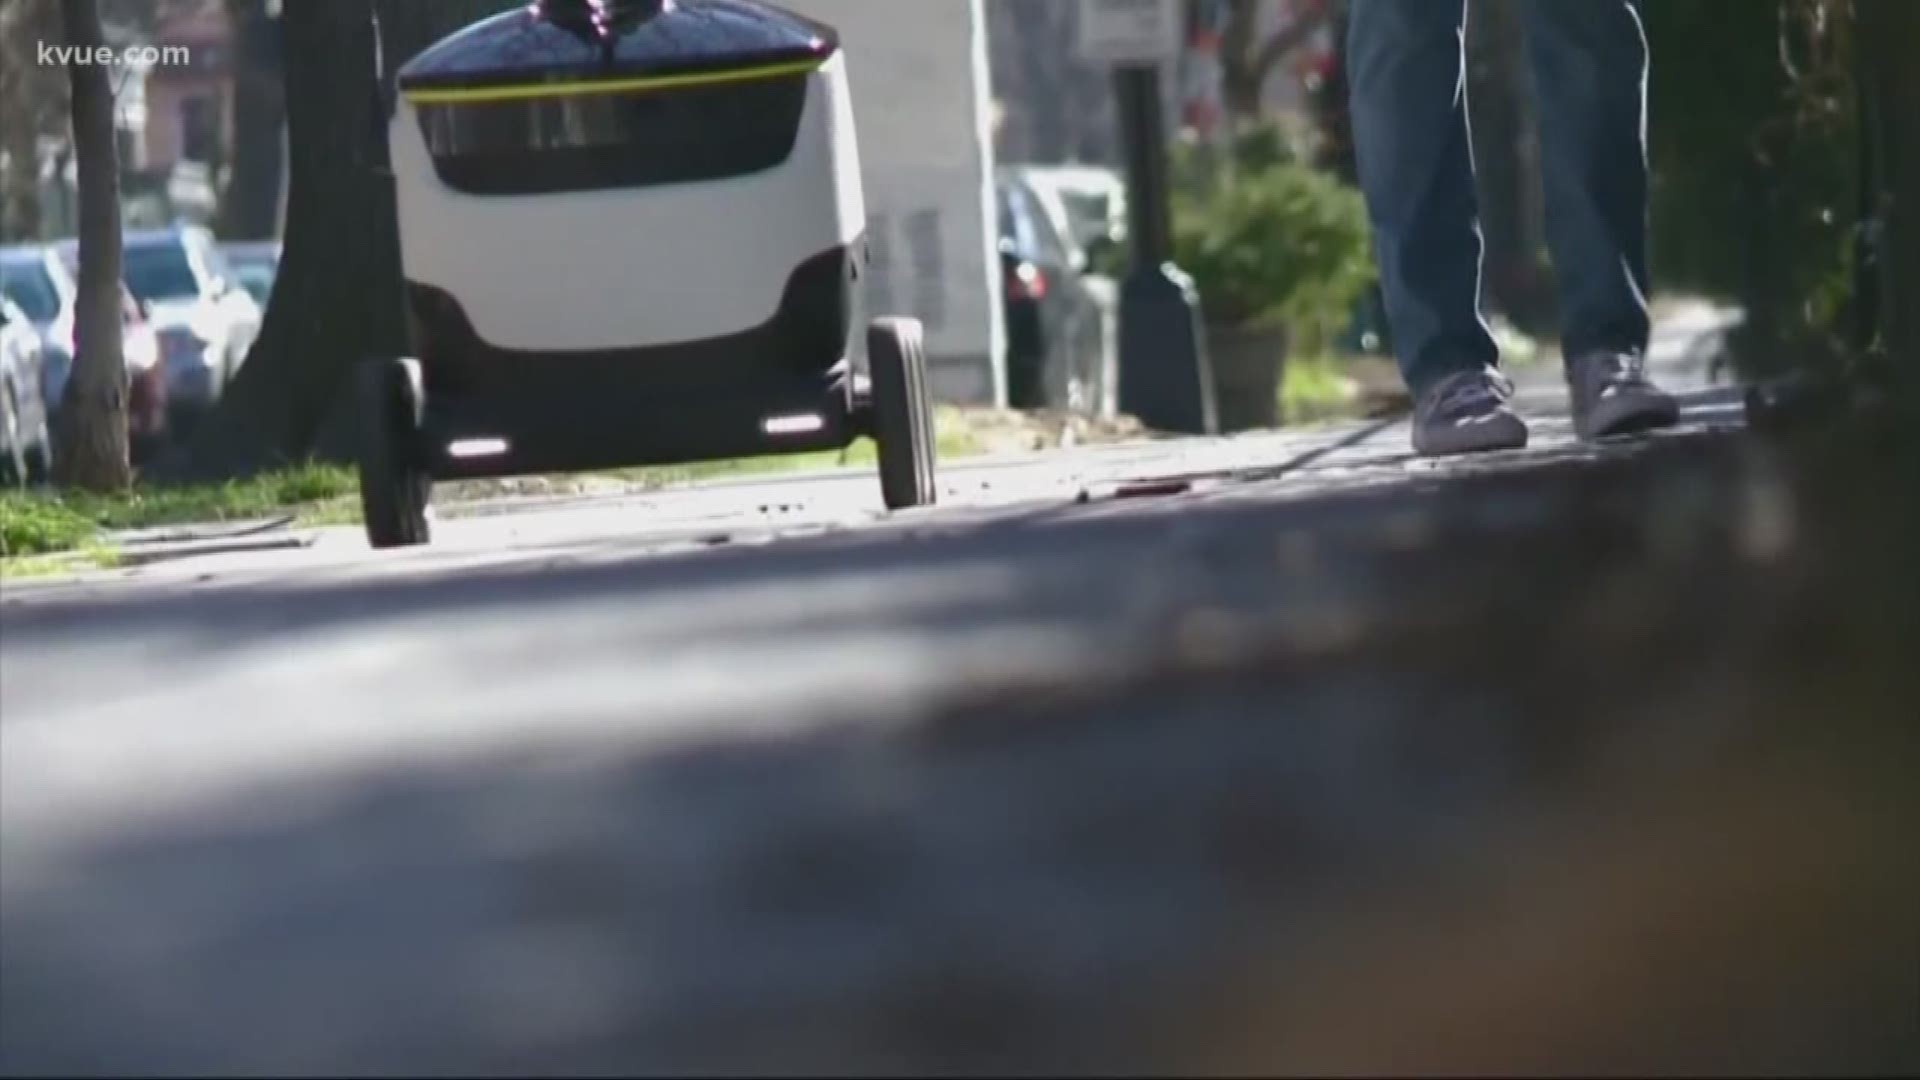 Imagine special robots dropping off items on your doorstep. A pilot program could roll out robotic deliveries in Austin as early as next year. But it raises a lot of questions.